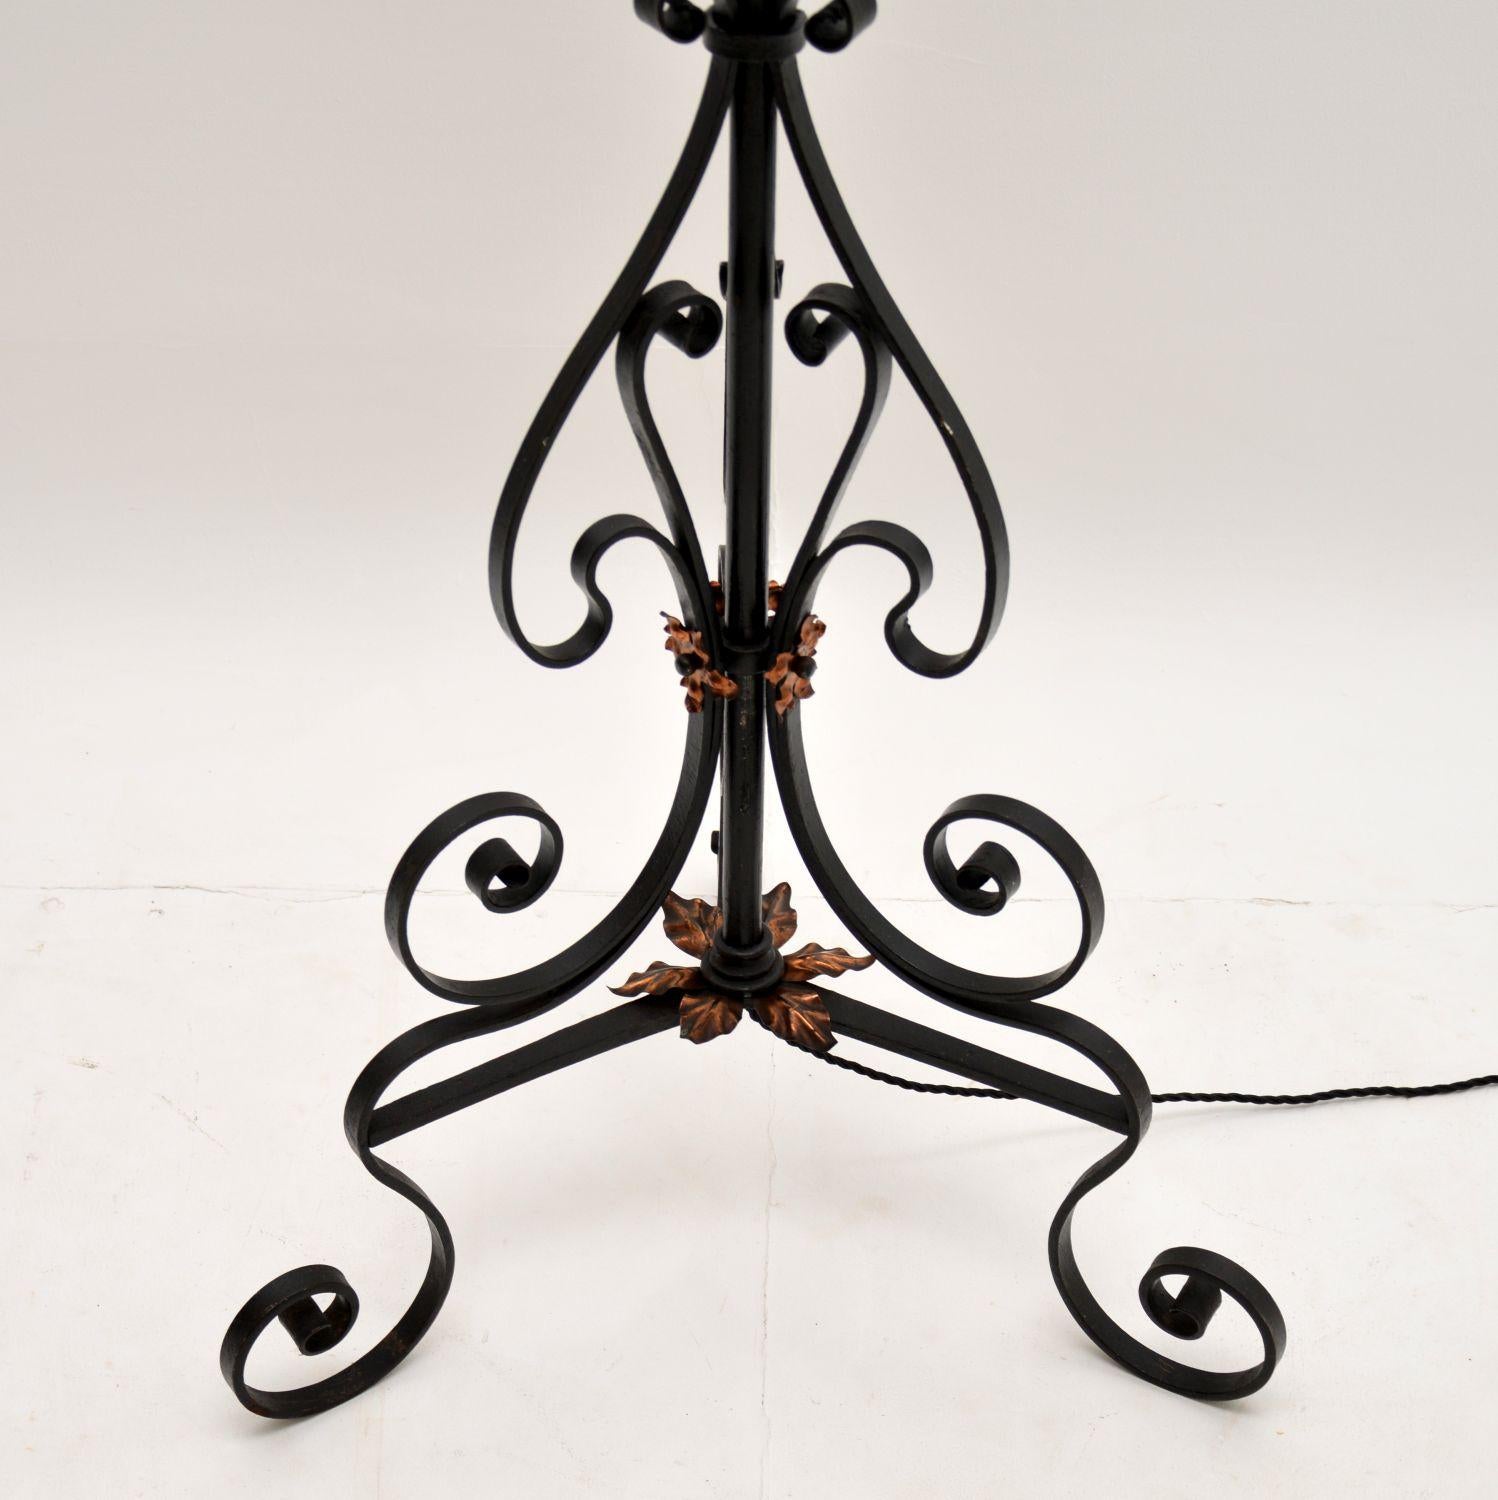 English Antique Wrought Iron & Copper Rise & Fall Floor Lamp